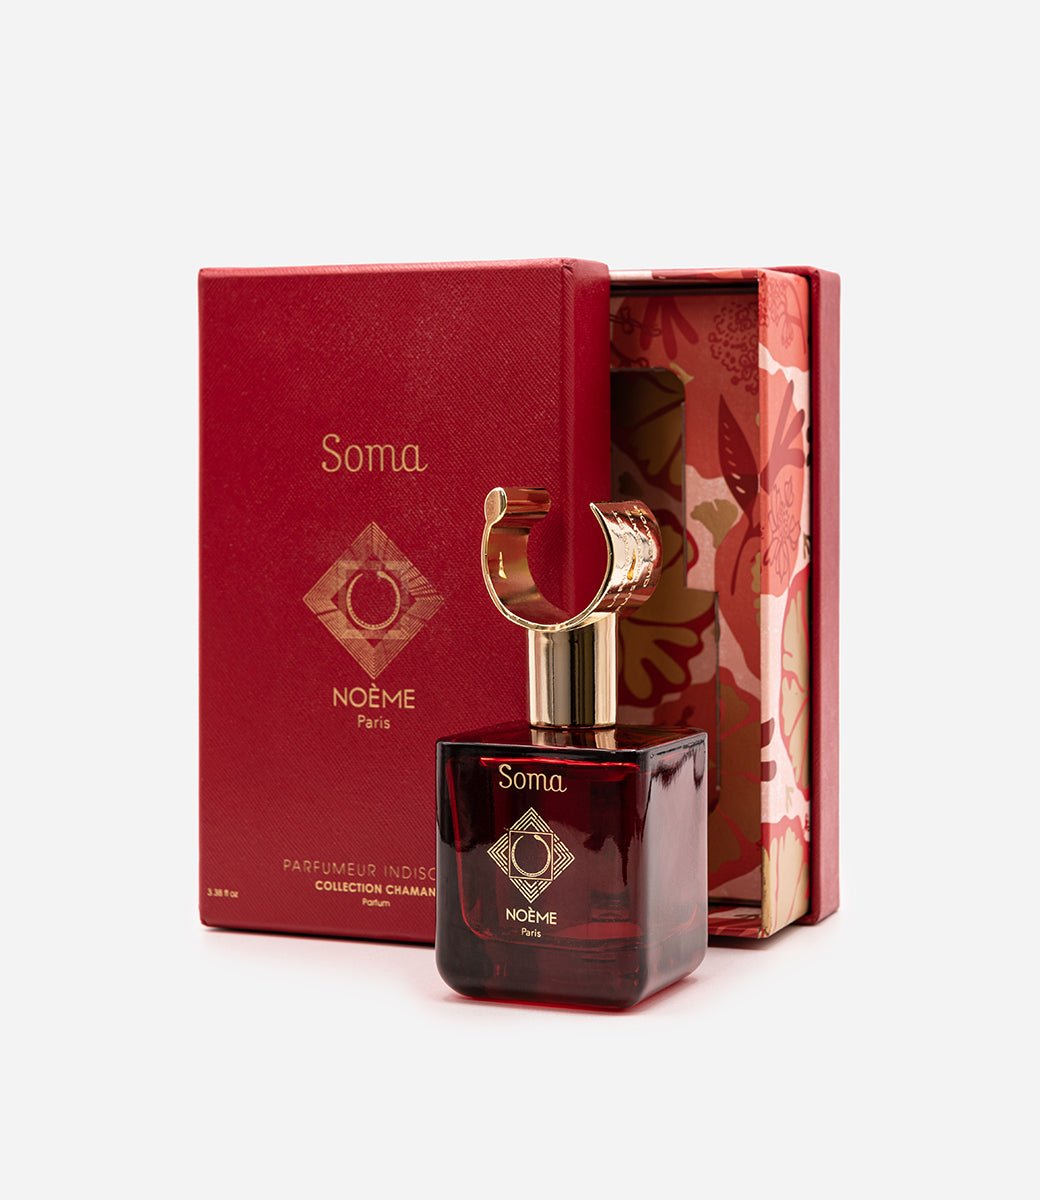 Reporter notes: Soma brand entices with new fragrance Enticing